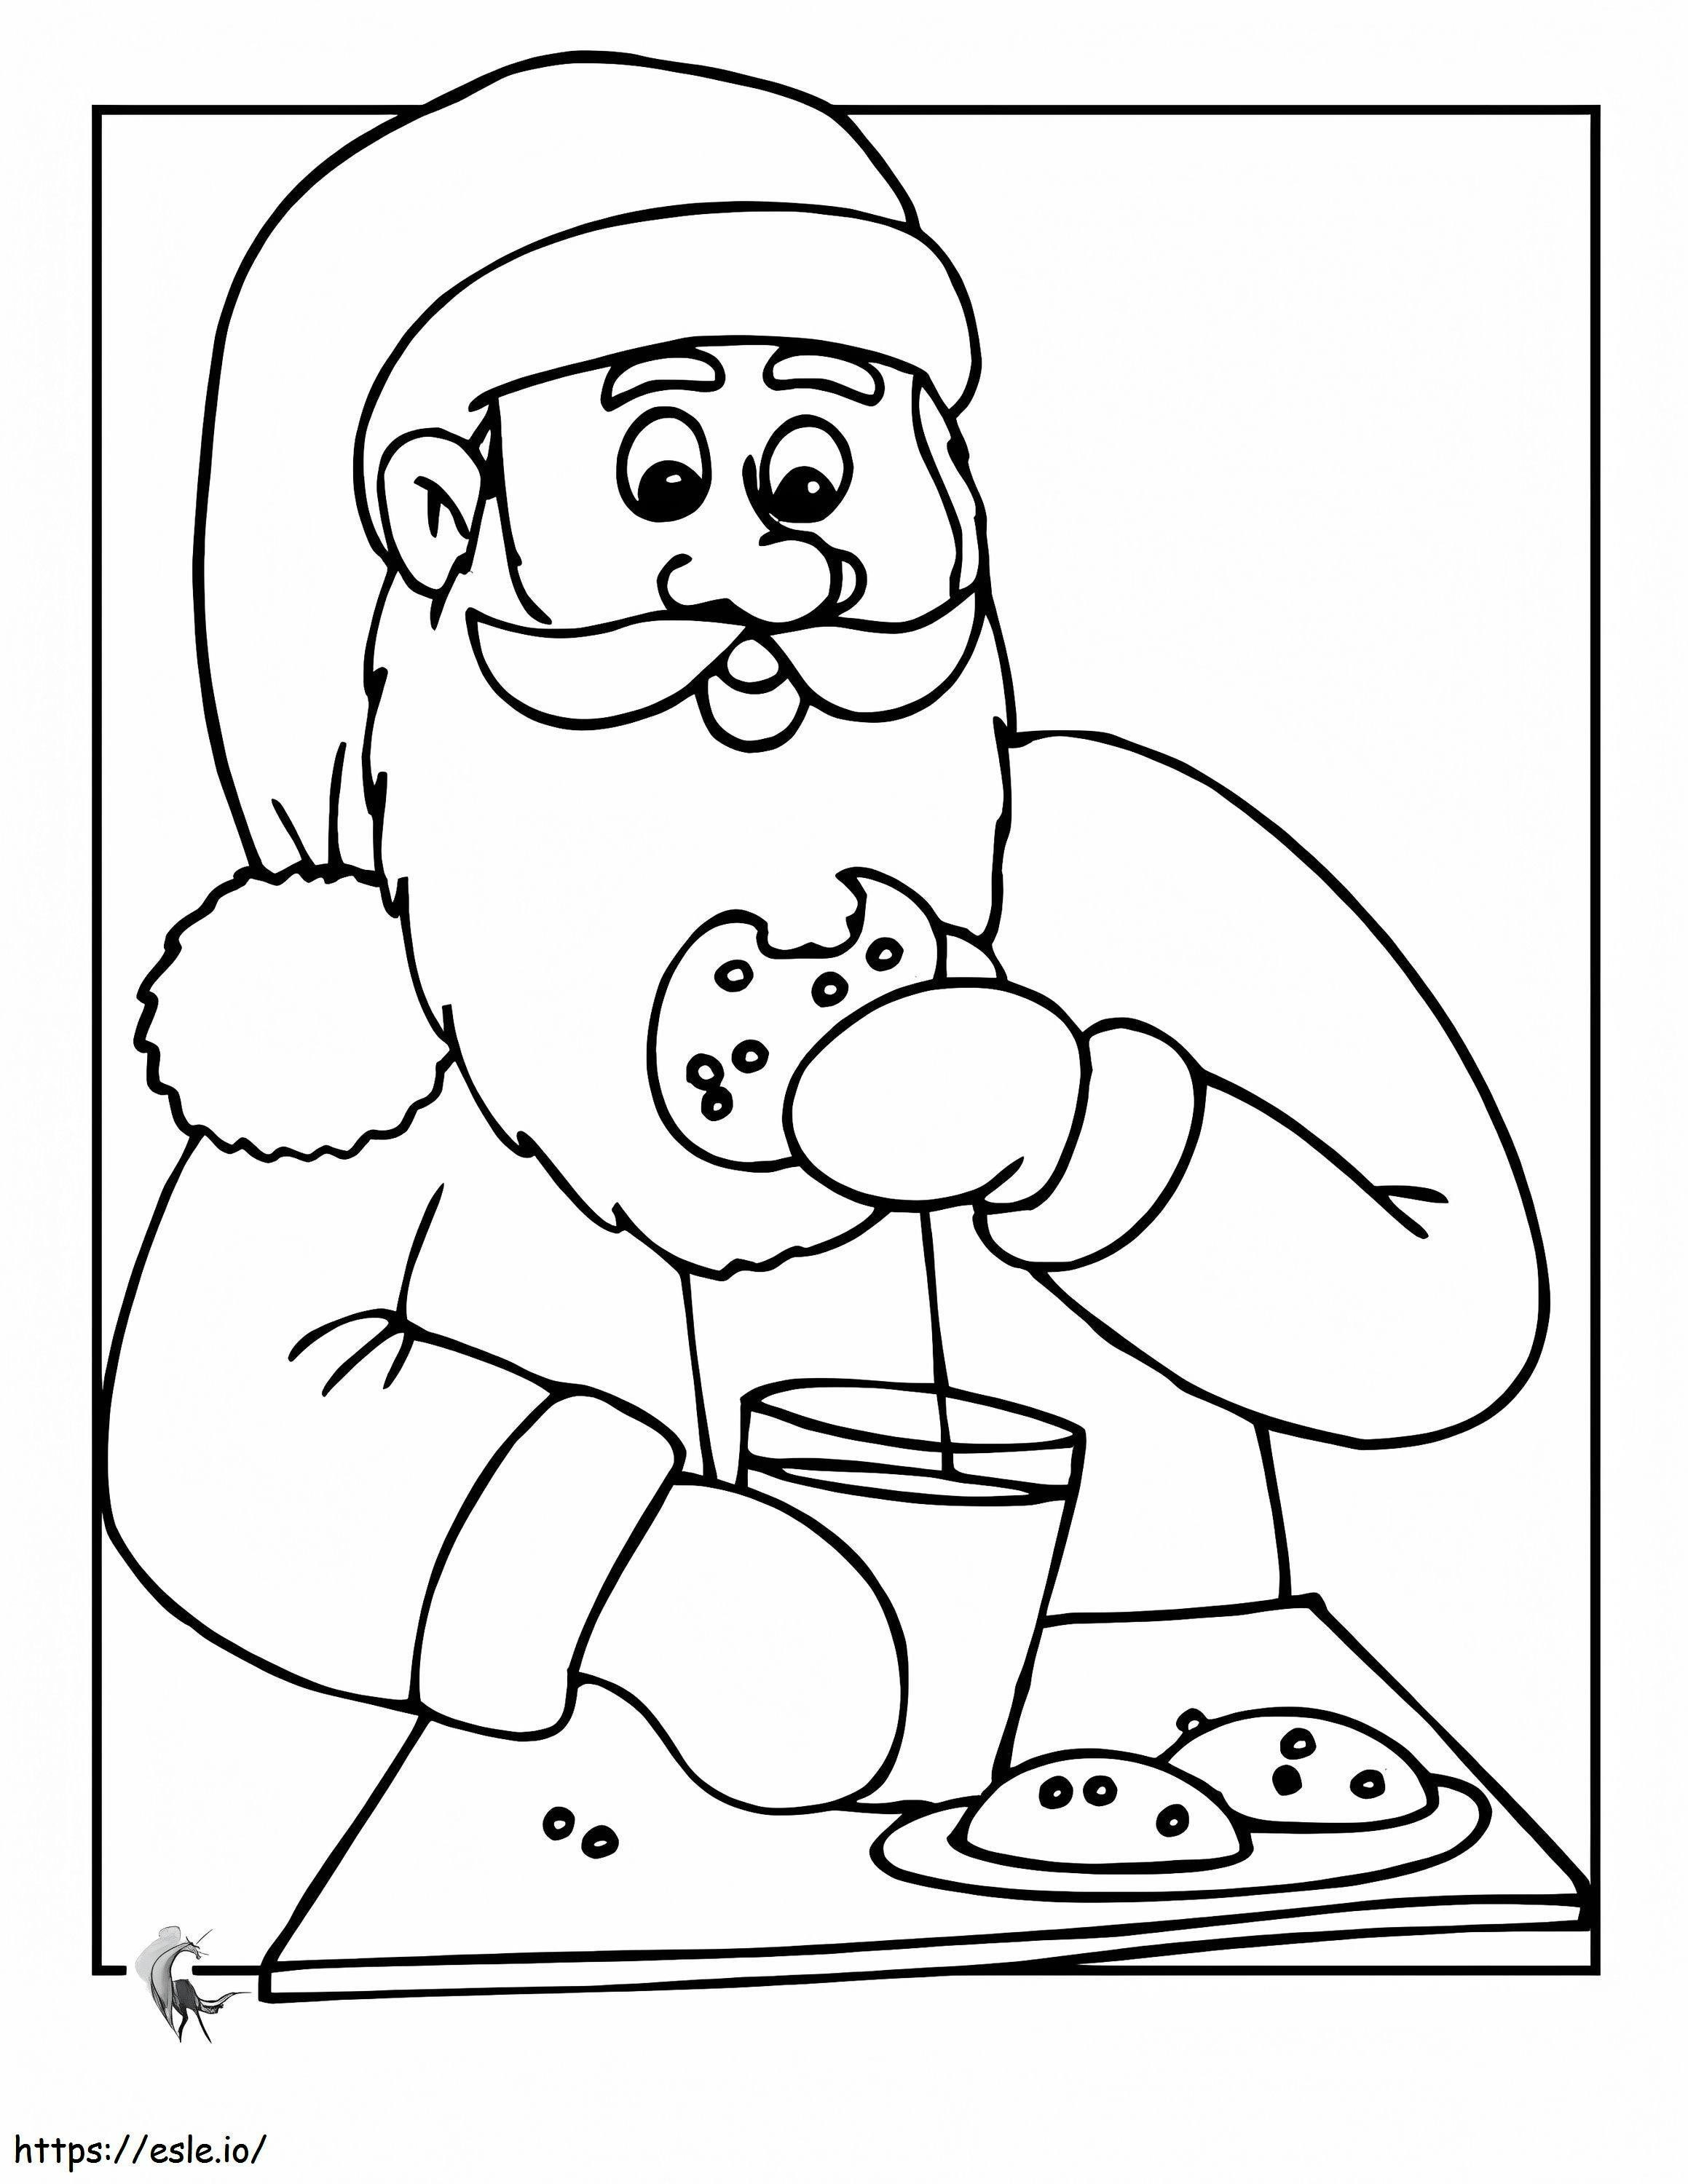 Santa Claus Eating Cookie coloring page